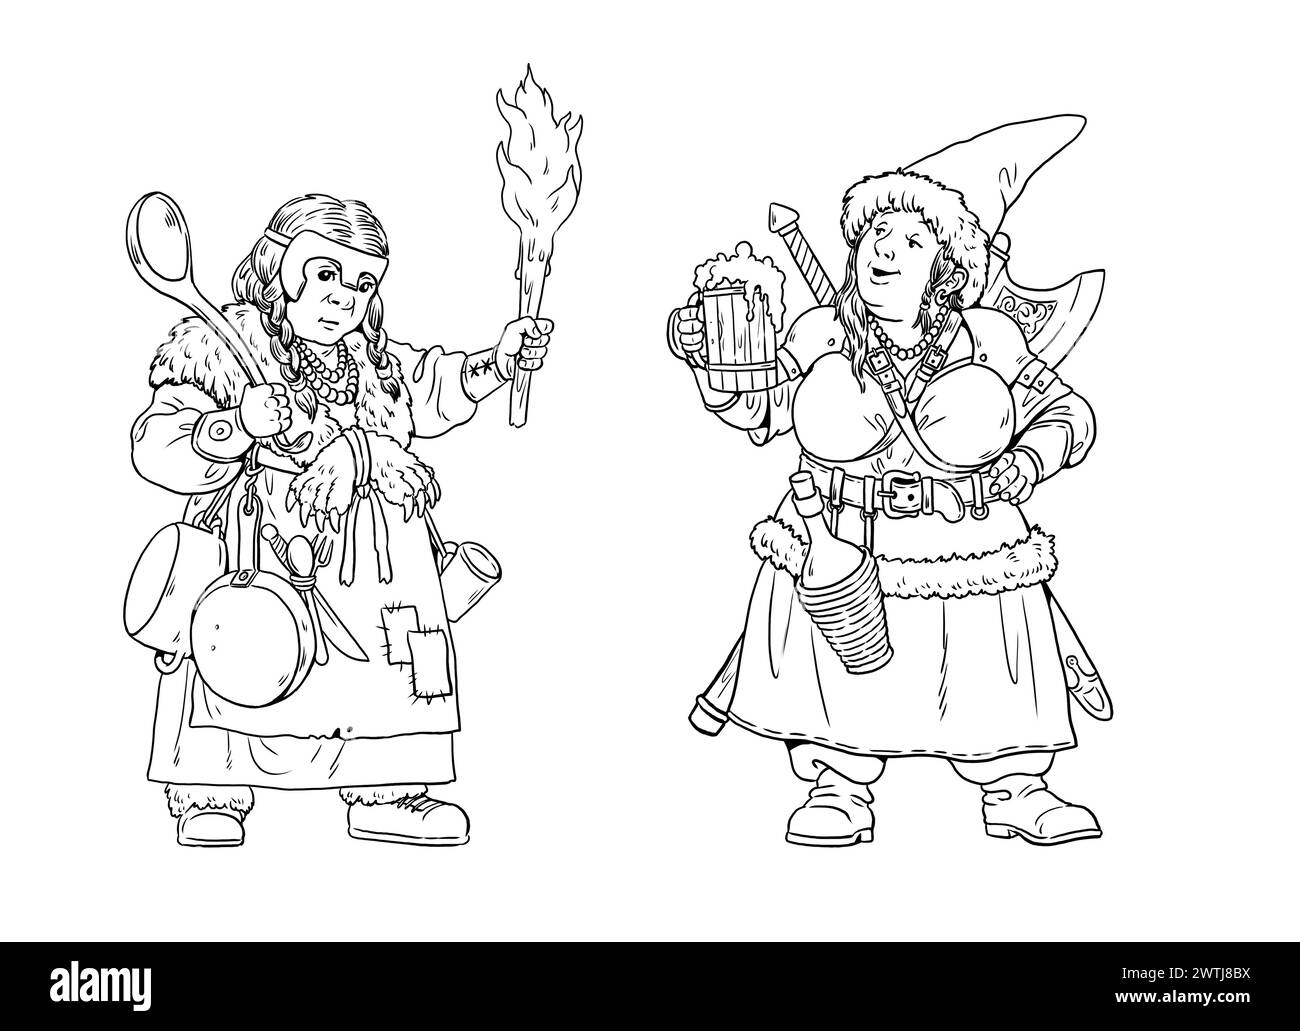 Drawing with two female war dwarves. Funny fantasy characters to color in. Stock Photo